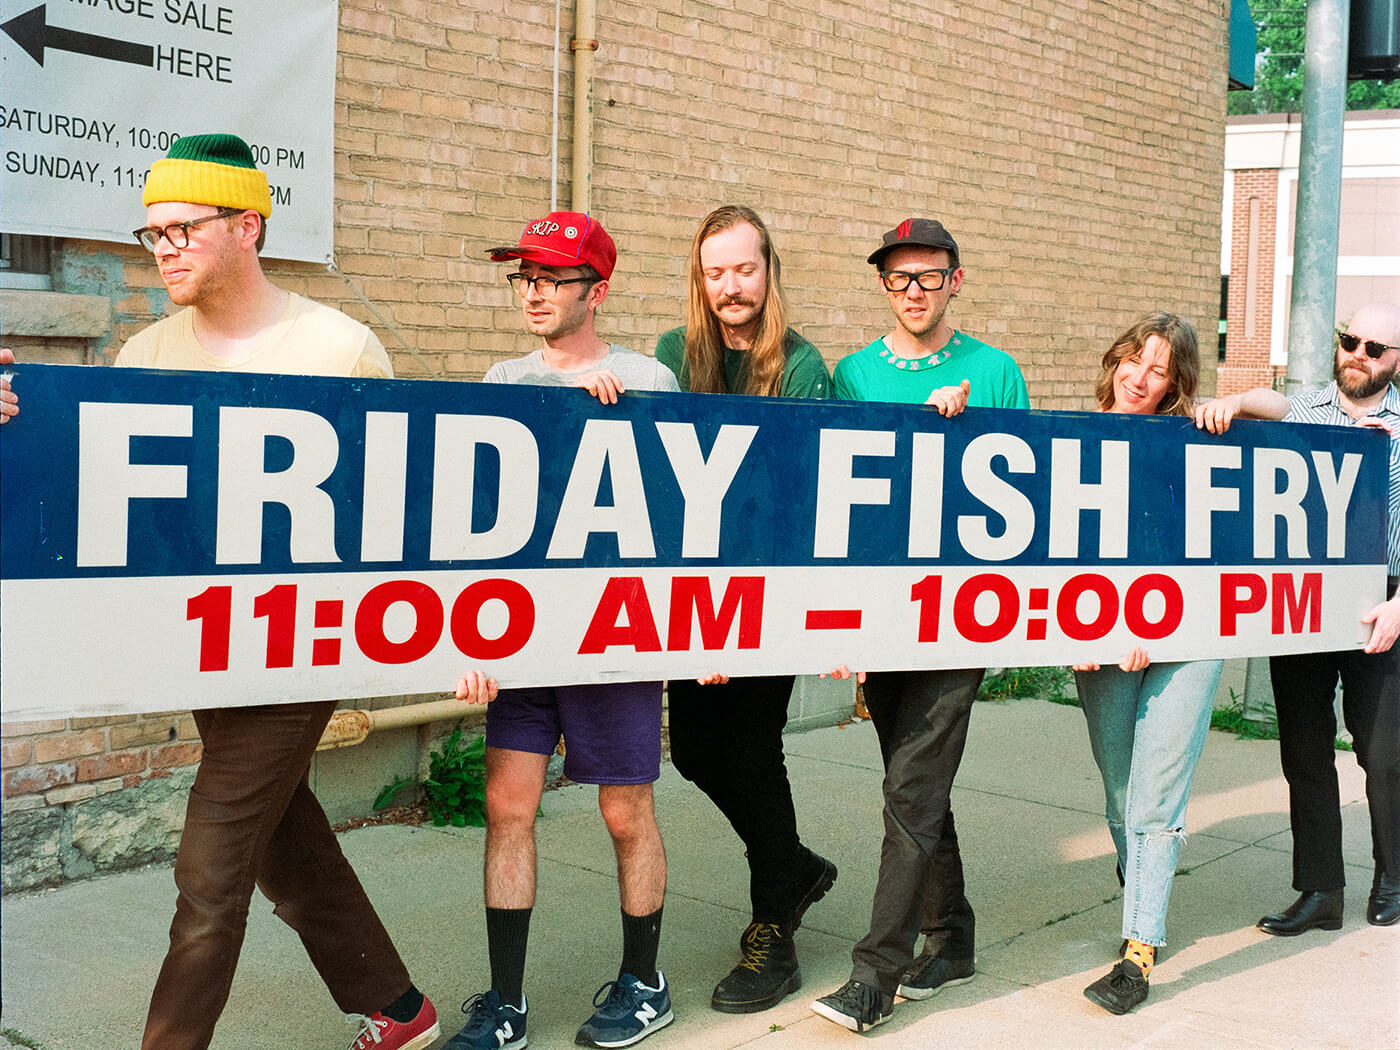 The band Dusk holding up a sign that says ‘Friday Fish Fry 11:00 AM - 10:00 PM’, photo by Billy Hintz